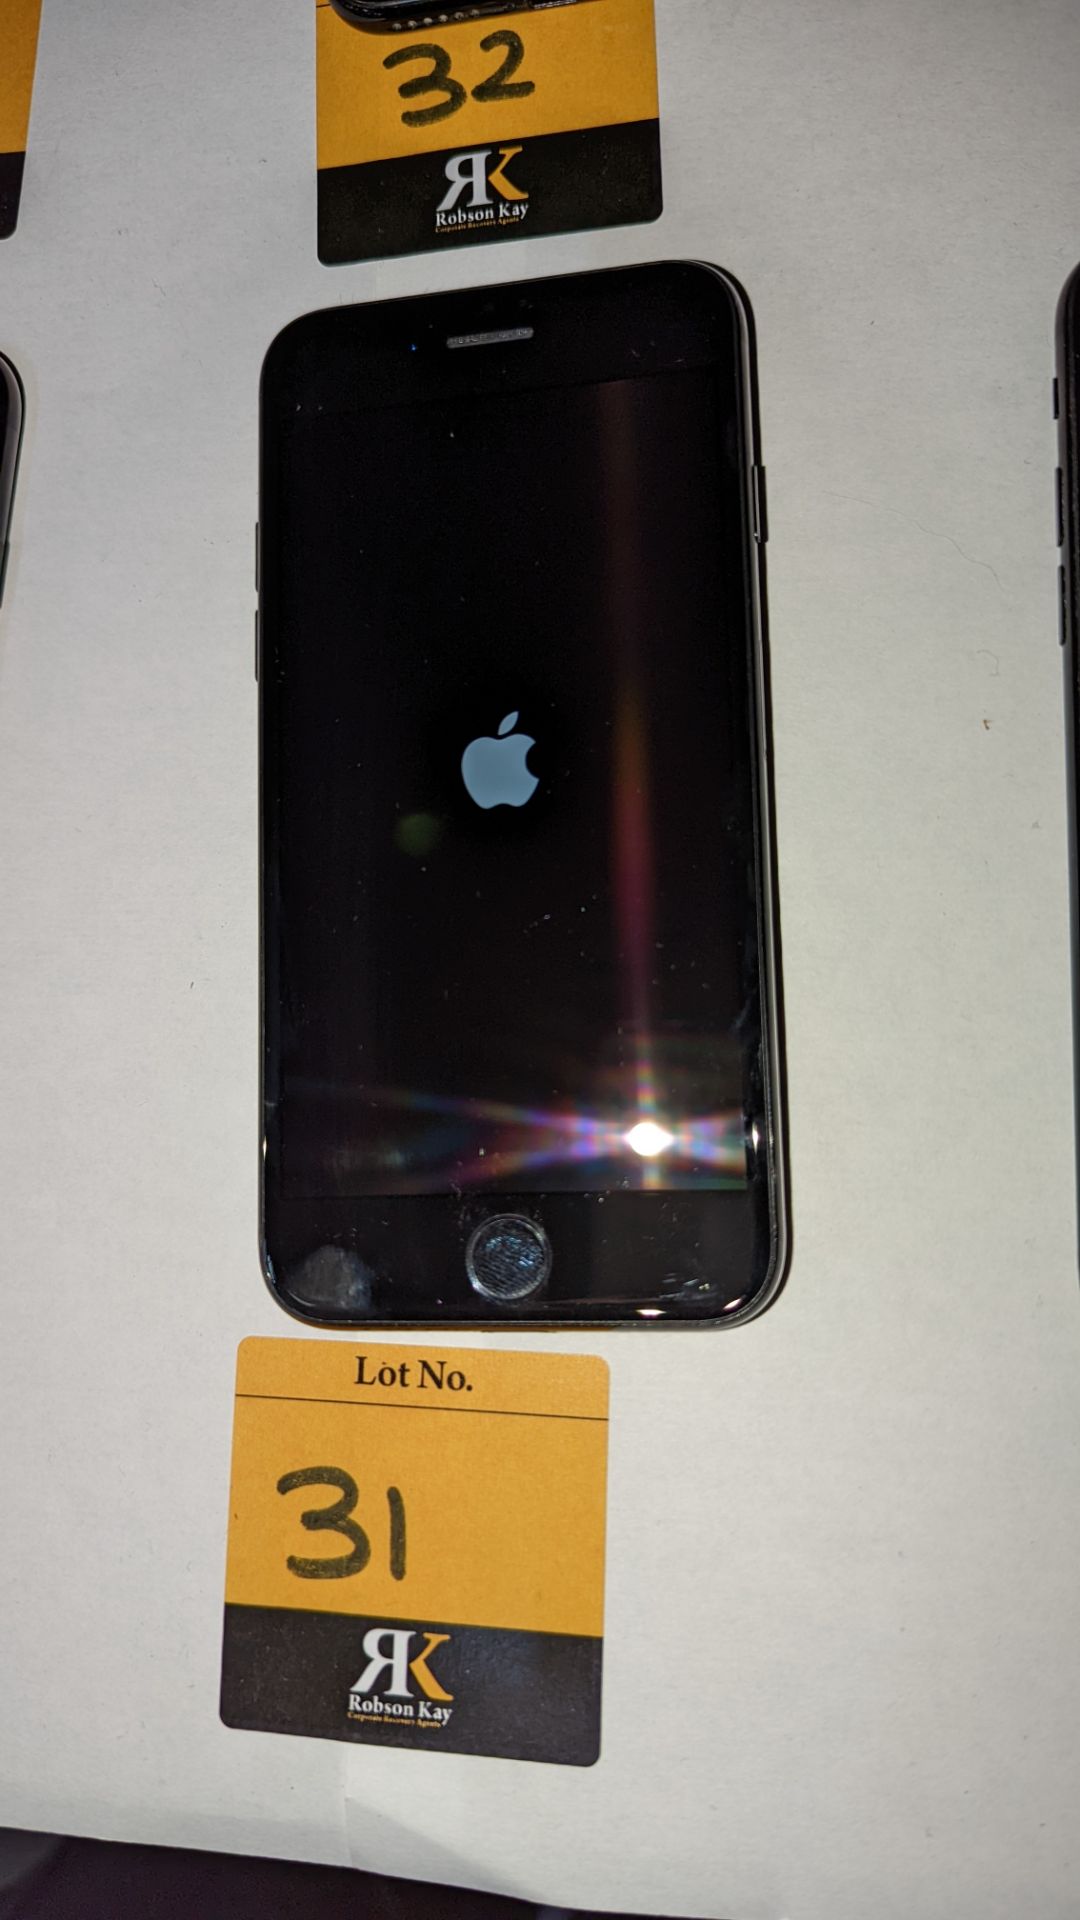 Apple iPhone 7, 32GB capacity, model A1778. No ancillaries or accessories - Image 15 of 16